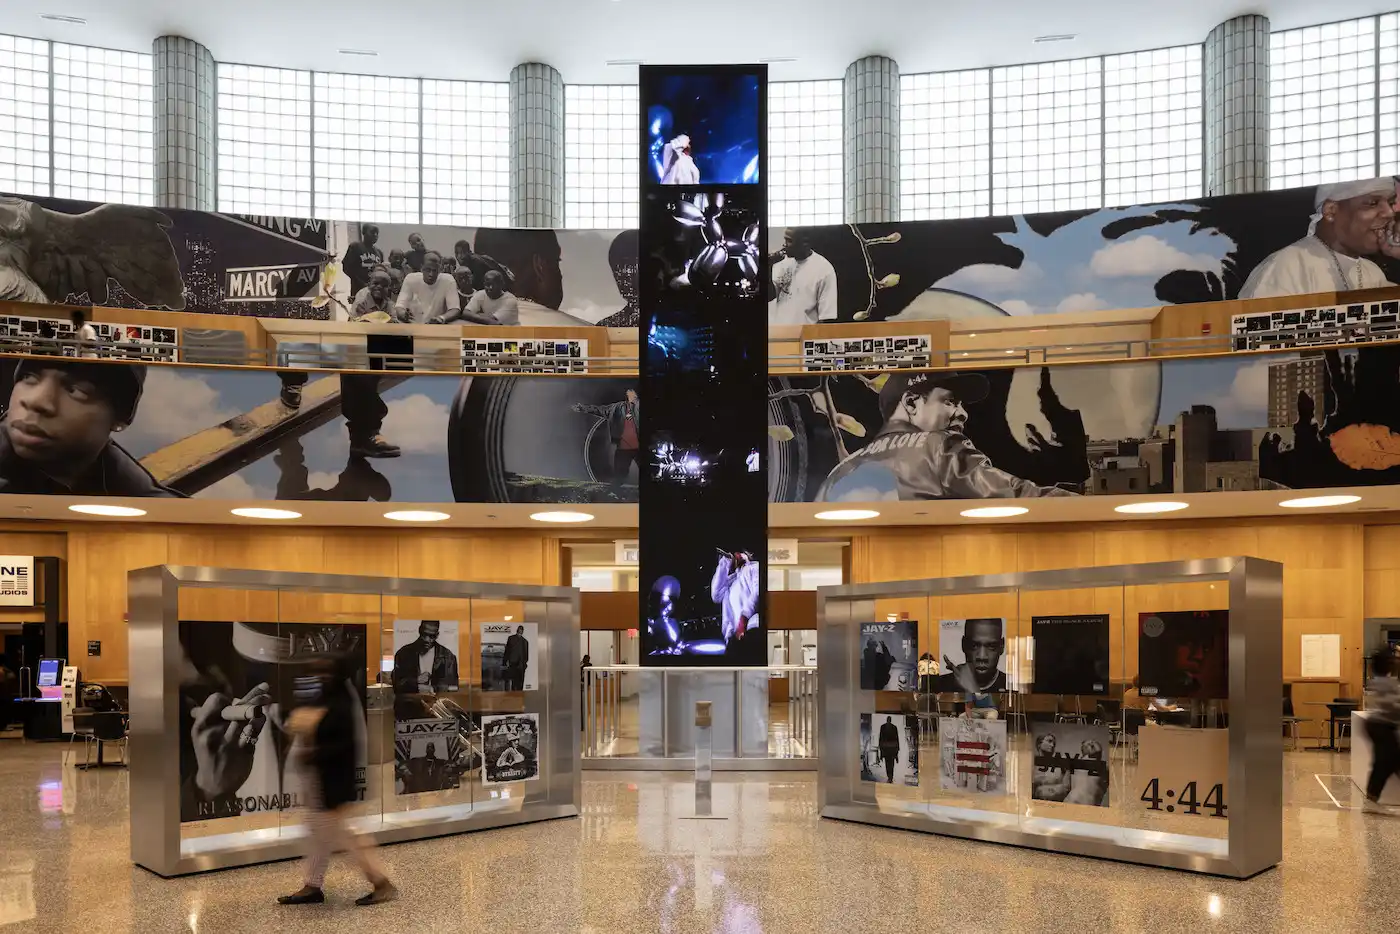 Jay-z exhibition at Brooklyn Public Library.